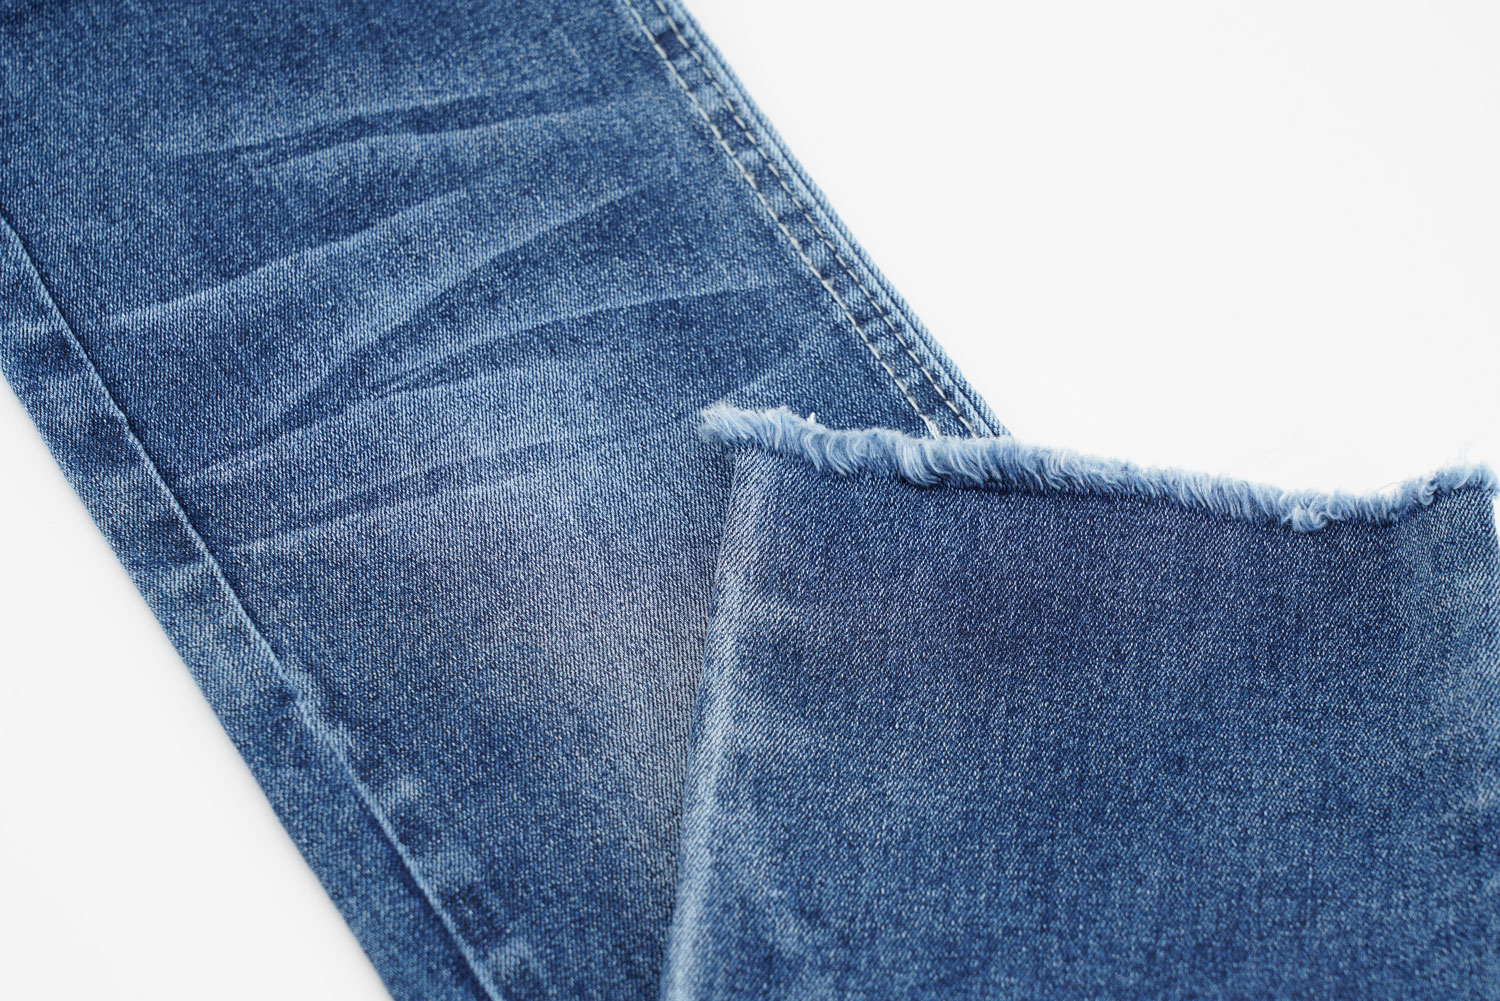 How to Use High Stretch Denim Fabric for Your Needs? 1